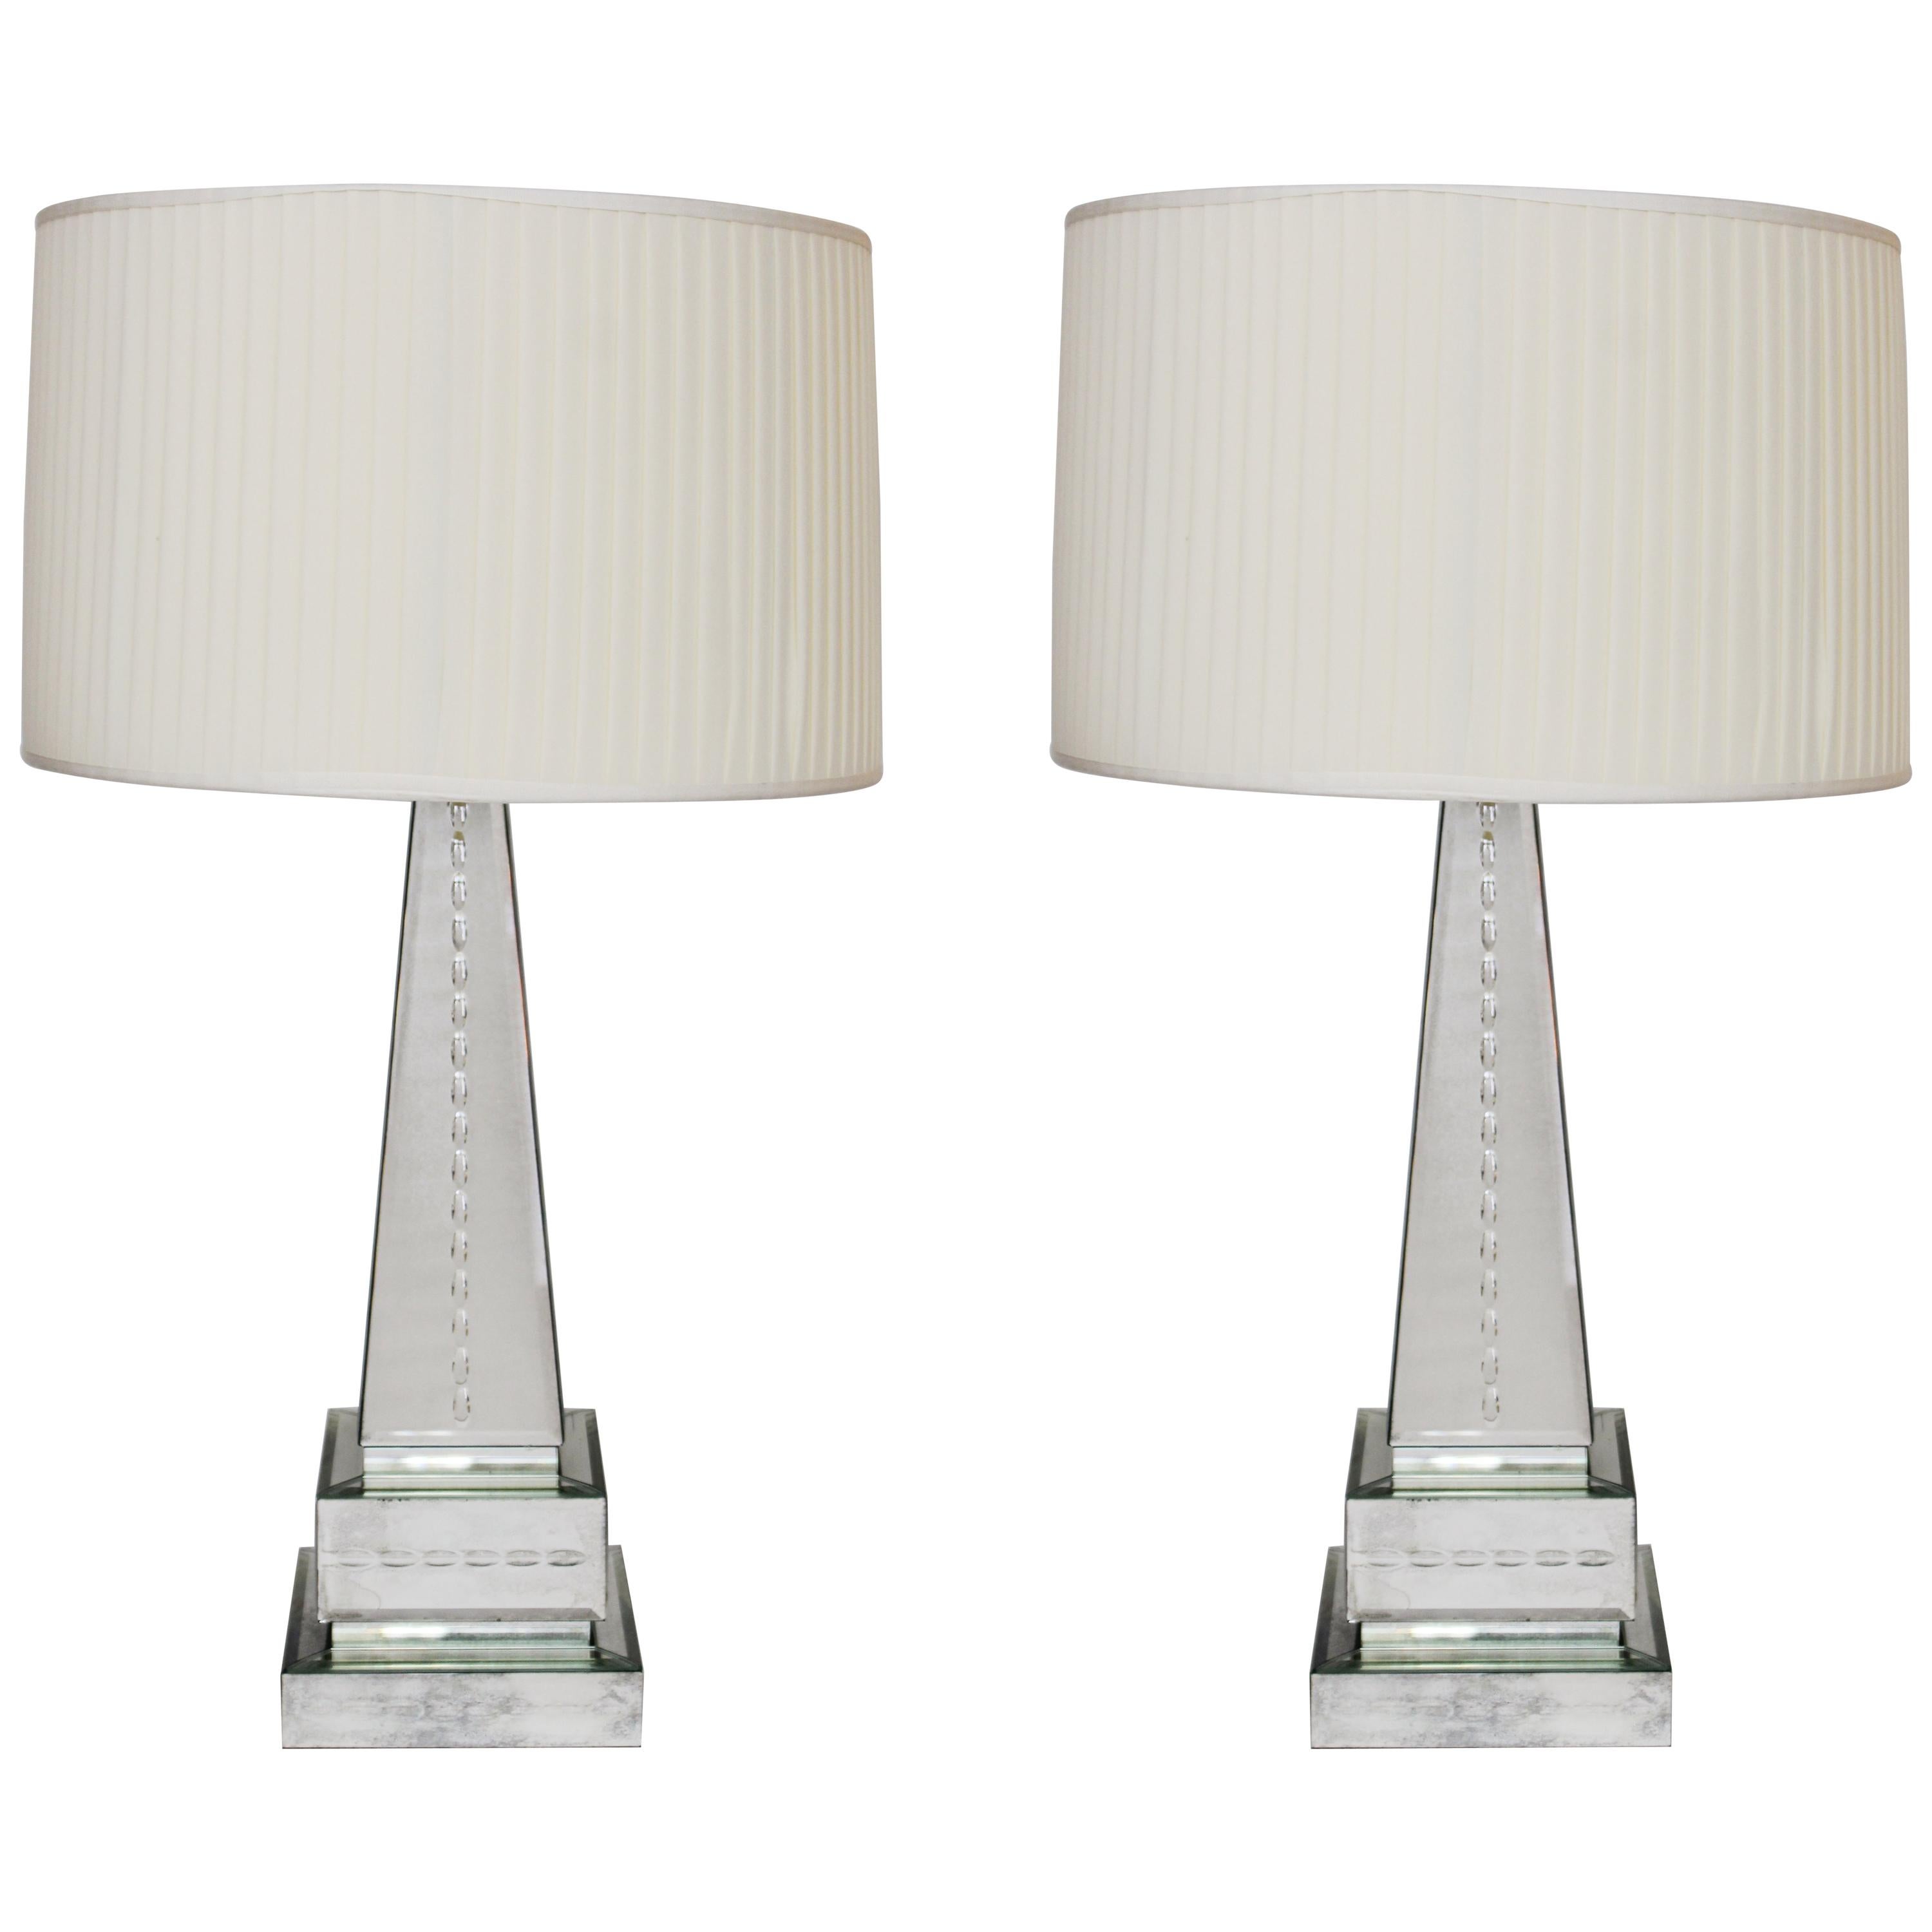 Hollywood Regency Style Mirrored Obelisk Table Lamps with Shades